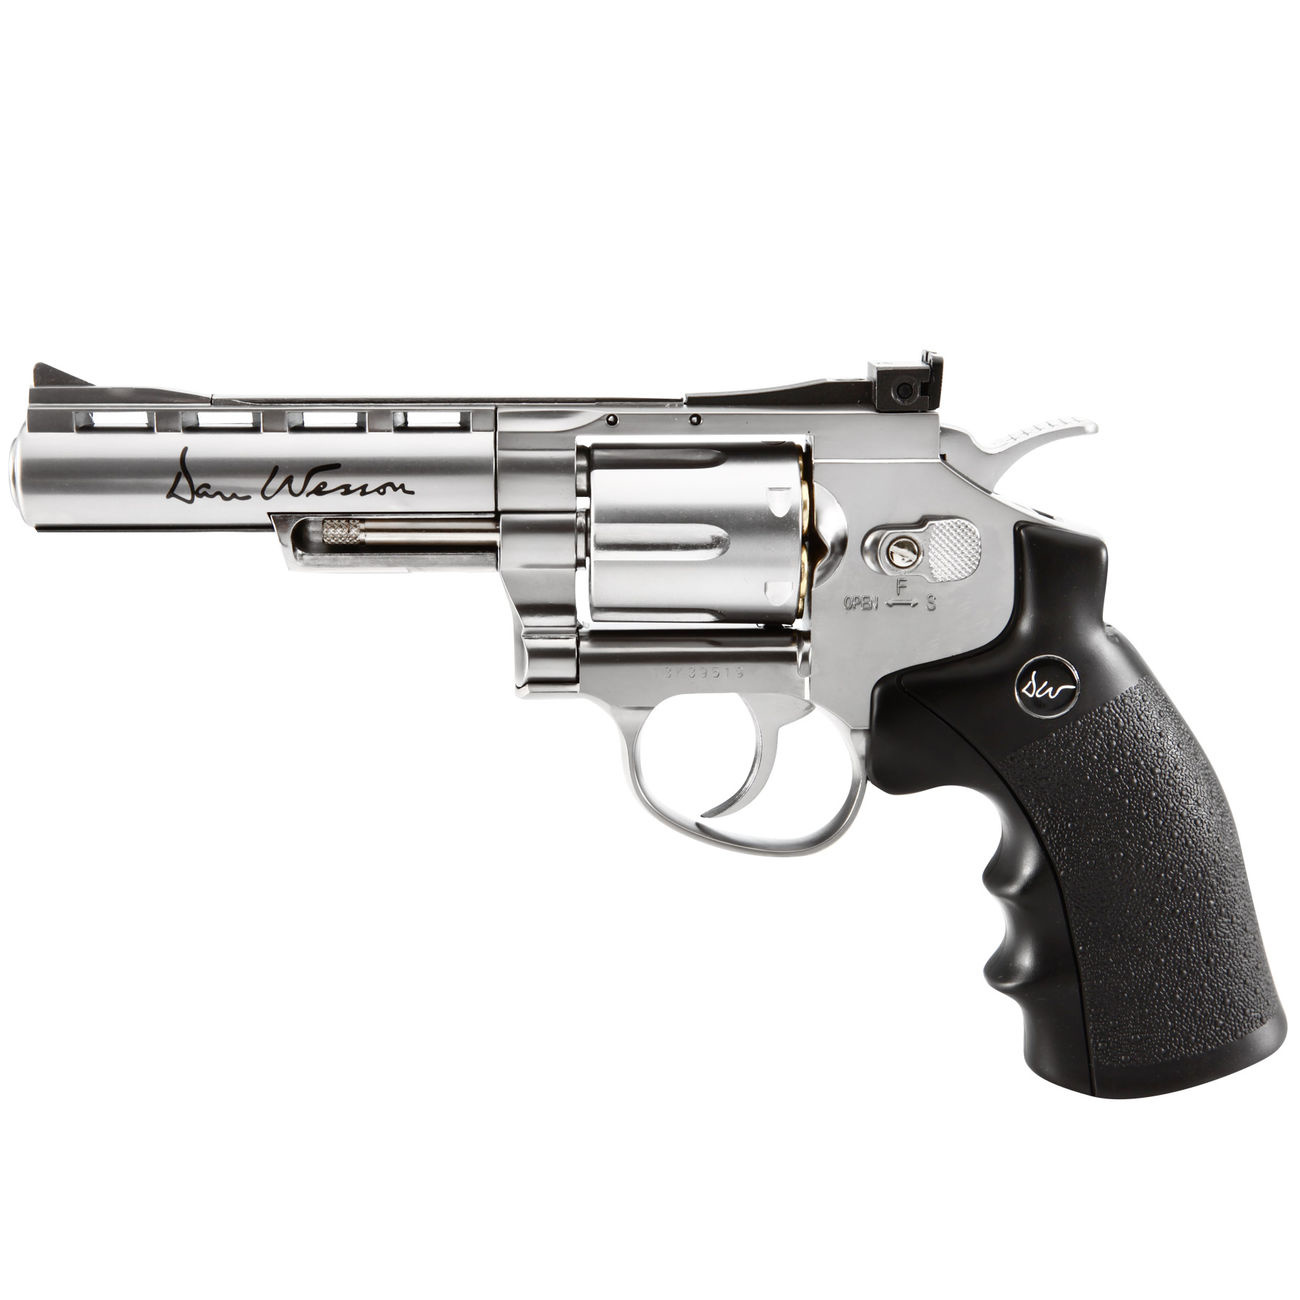 ASG 4 Zoll Dan Wesson Revolver Co2 NBB 1,80 Joule - Silber